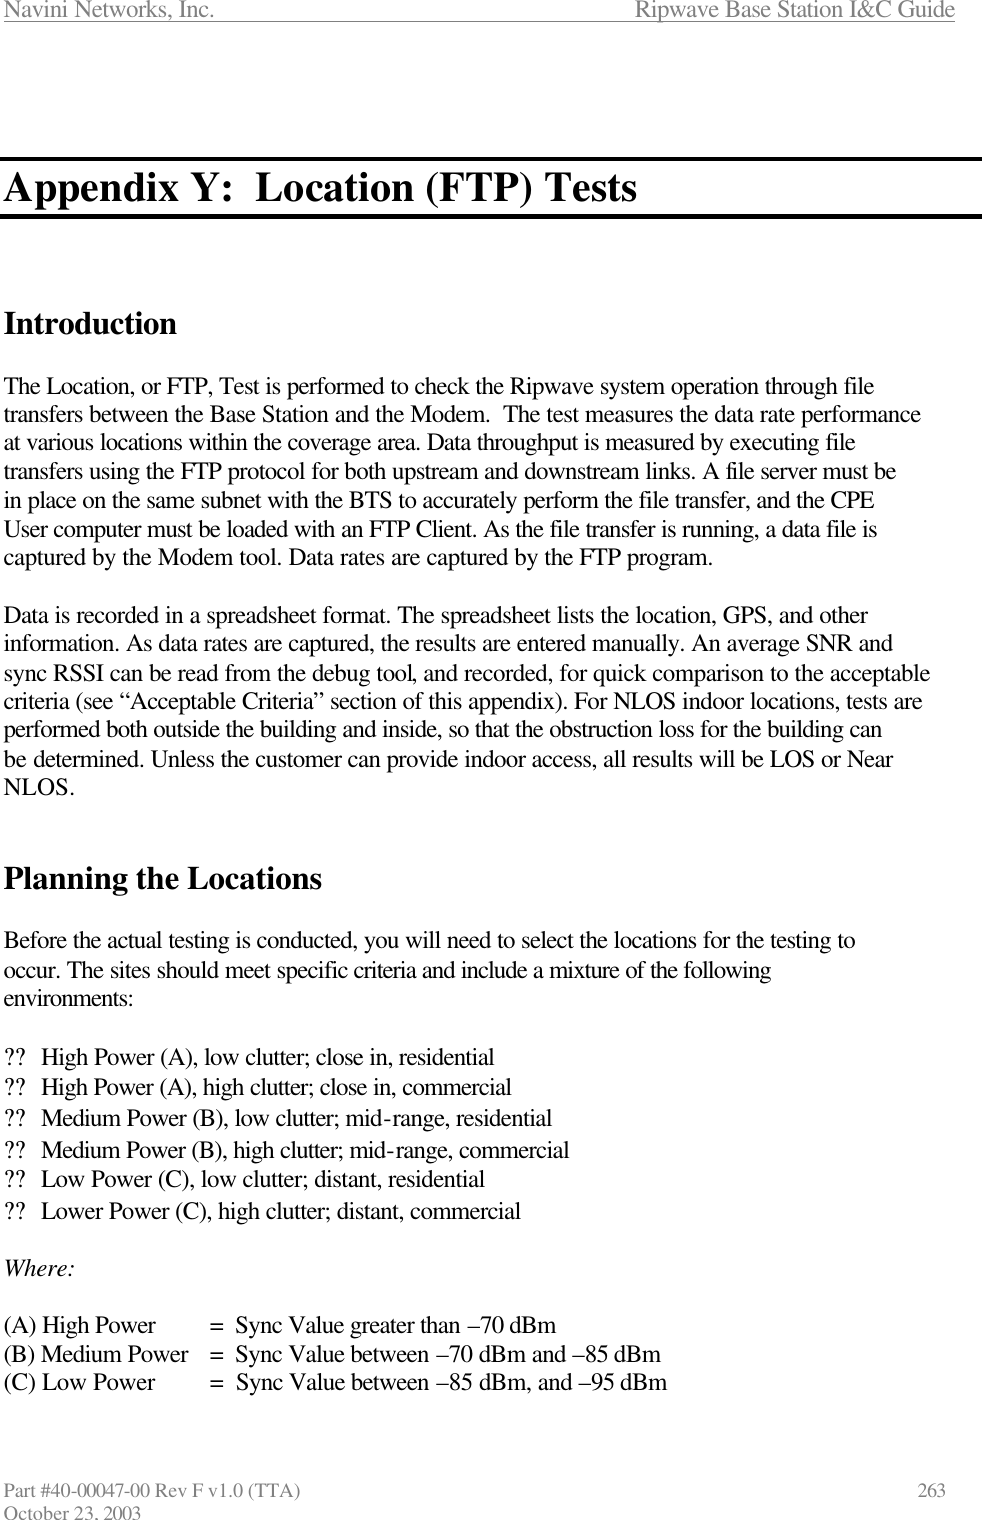 Navini Networks, Inc.                      Ripwave Base Station I&amp;C Guide Part #40-00047-00 Rev F v1.0 (TTA)            263 October 23, 2003    Appendix Y:  Location (FTP) Tests    Introduction  The Location, or FTP, Test is performed to check the Ripwave system operation through file transfers between the Base Station and the Modem.  The test measures the data rate performance at various locations within the coverage area. Data throughput is measured by executing file transfers using the FTP protocol for both upstream and downstream links. A file server must be in place on the same subnet with the BTS to accurately perform the file transfer, and the CPE User computer must be loaded with an FTP Client. As the file transfer is running, a data file is captured by the Modem tool. Data rates are captured by the FTP program.   Data is recorded in a spreadsheet format. The spreadsheet lists the location, GPS, and other information. As data rates are captured, the results are entered manually. An average SNR and sync RSSI can be read from the debug tool, and recorded, for quick comparison to the acceptable criteria (see “Acceptable Criteria” section of this appendix). For NLOS indoor locations, tests are performed both outside the building and inside, so that the obstruction loss for the building can be determined. Unless the customer can provide indoor access, all results will be LOS or Near NLOS.    Planning the Locations  Before the actual testing is conducted, you will need to select the locations for the testing to occur. The sites should meet specific criteria and include a mixture of the following environments:  ?? High Power (A), low clutter; close in, residential ?? High Power (A), high clutter; close in, commercial ?? Medium Power (B), low clutter; mid-range, residential ?? Medium Power (B), high clutter; mid-range, commercial ?? Low Power (C), low clutter; distant, residential ?? Lower Power (C), high clutter; distant, commercial  Where:  (A) High Power =  Sync Value greater than –70 dBm  (B) Medium Power =  Sync Value between –70 dBm and –85 dBm  (C) Low Power =  Sync Value between –85 dBm, and –95 dBm  